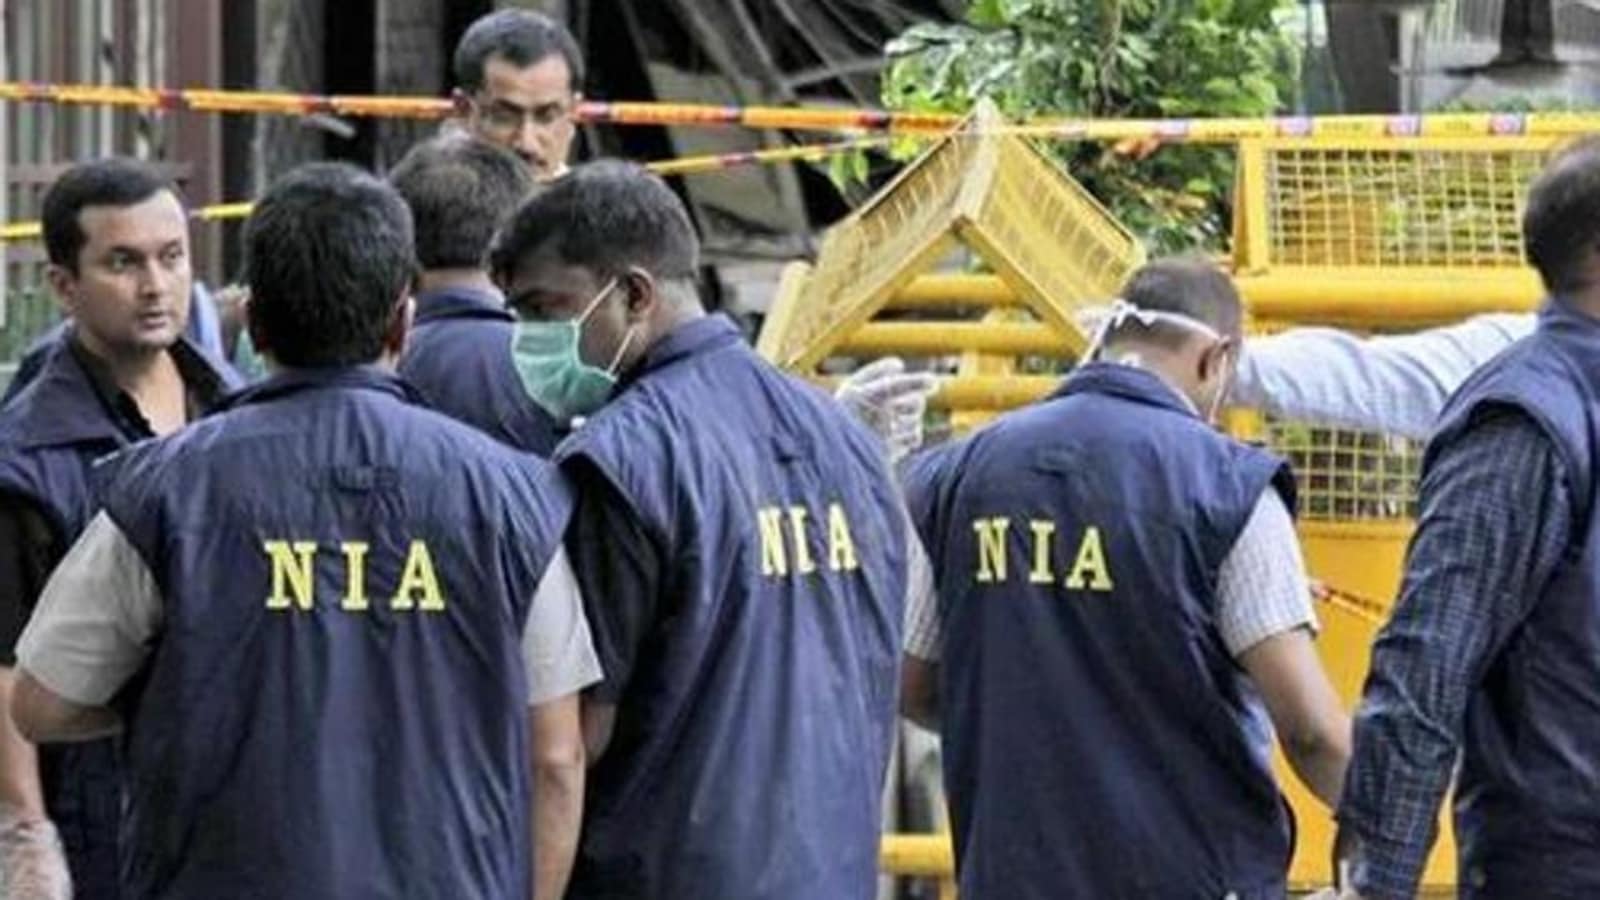 ISIS activities: NIA conducts searches in 6 states, seizes incriminating papers | Latest News India - Hindustan Times